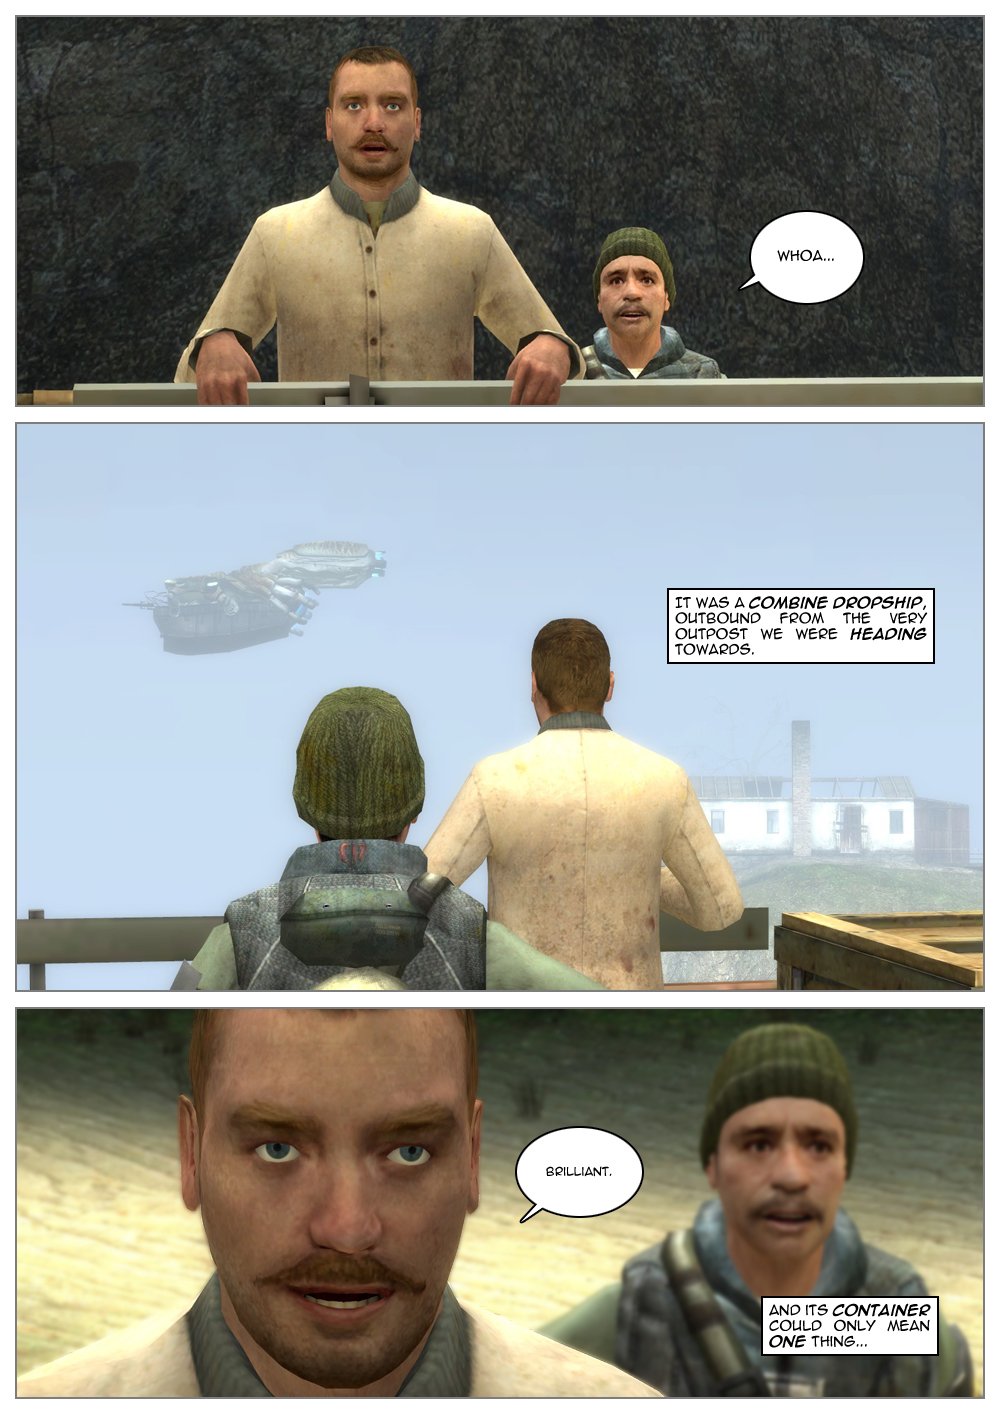 Hercule and Martin get up and stare at the sky, gobsmacked. Martin mutters: Whoa... They are both looking at an enormous alien biomechanical creature, carrying a big metal container. Narration: It was a Combine dropship, outbound from the very outpost we were heading towards. End narration. Hercule can't help but give a small smile at the sight of it. He whispers to himself: Brilliant. Narration: And its container could only mean one thing... End narration.